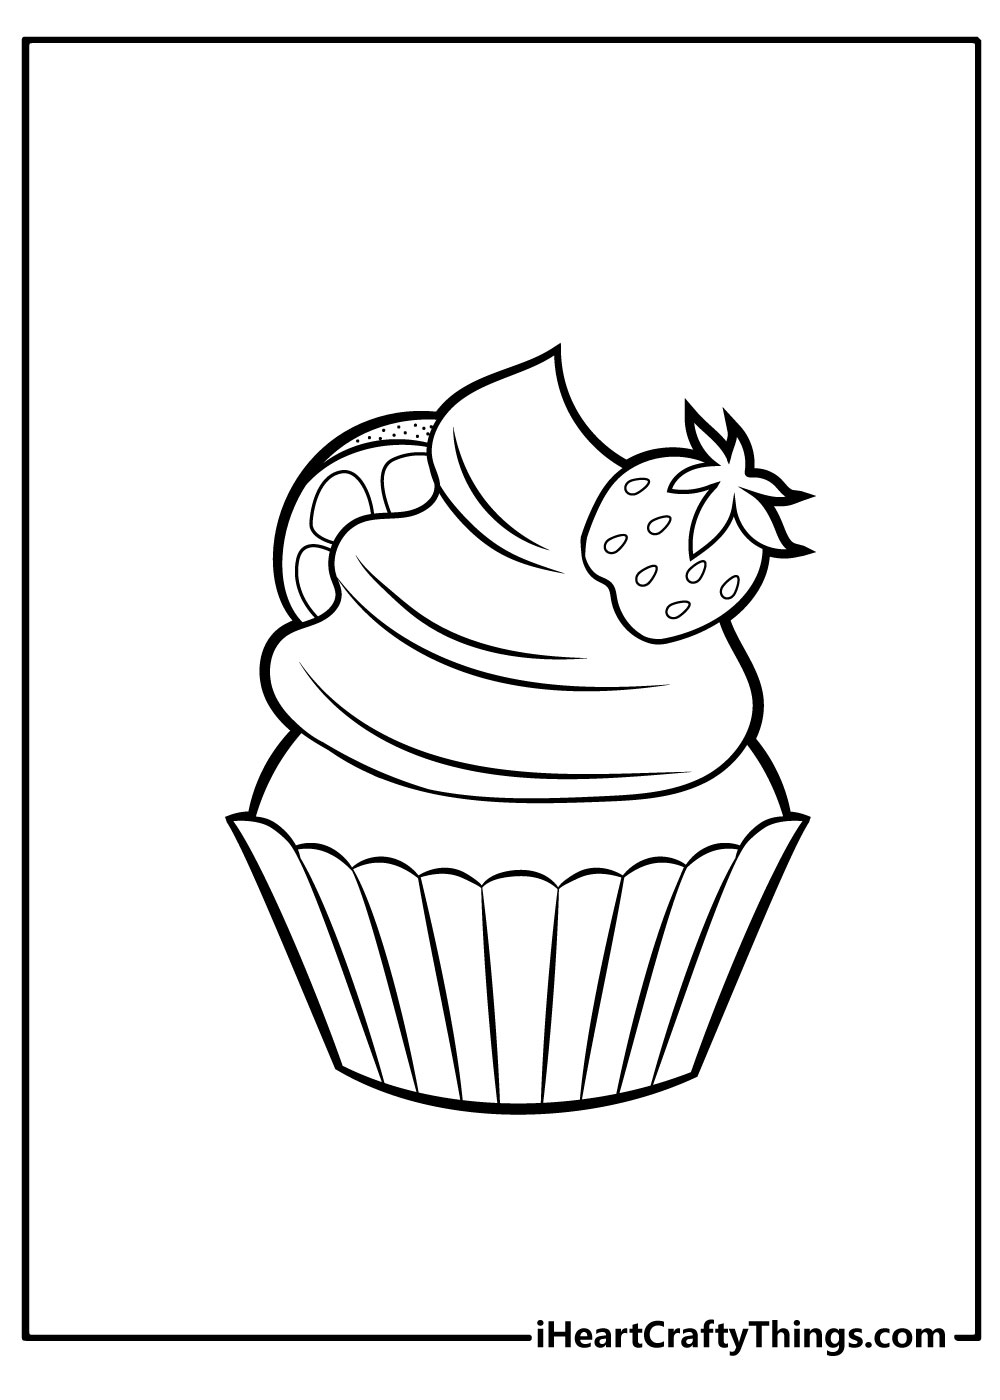 realistic Cupcake Coloring Pages free for kids